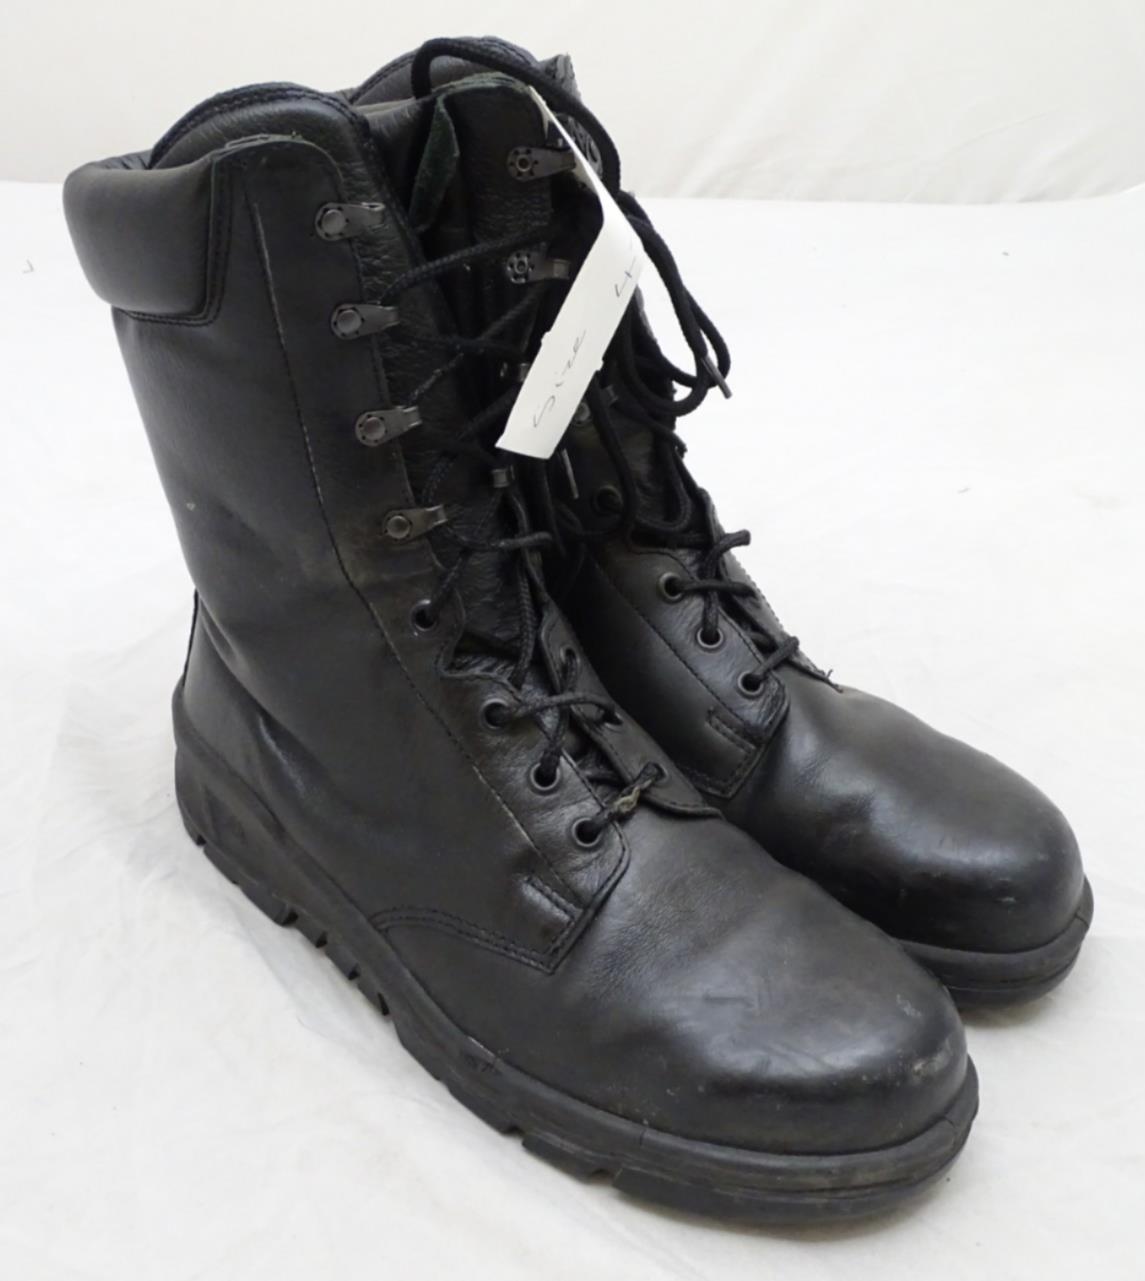 Used BATA Black Leather Steel Toe Cap Boots Tactical Military Style 3 ...